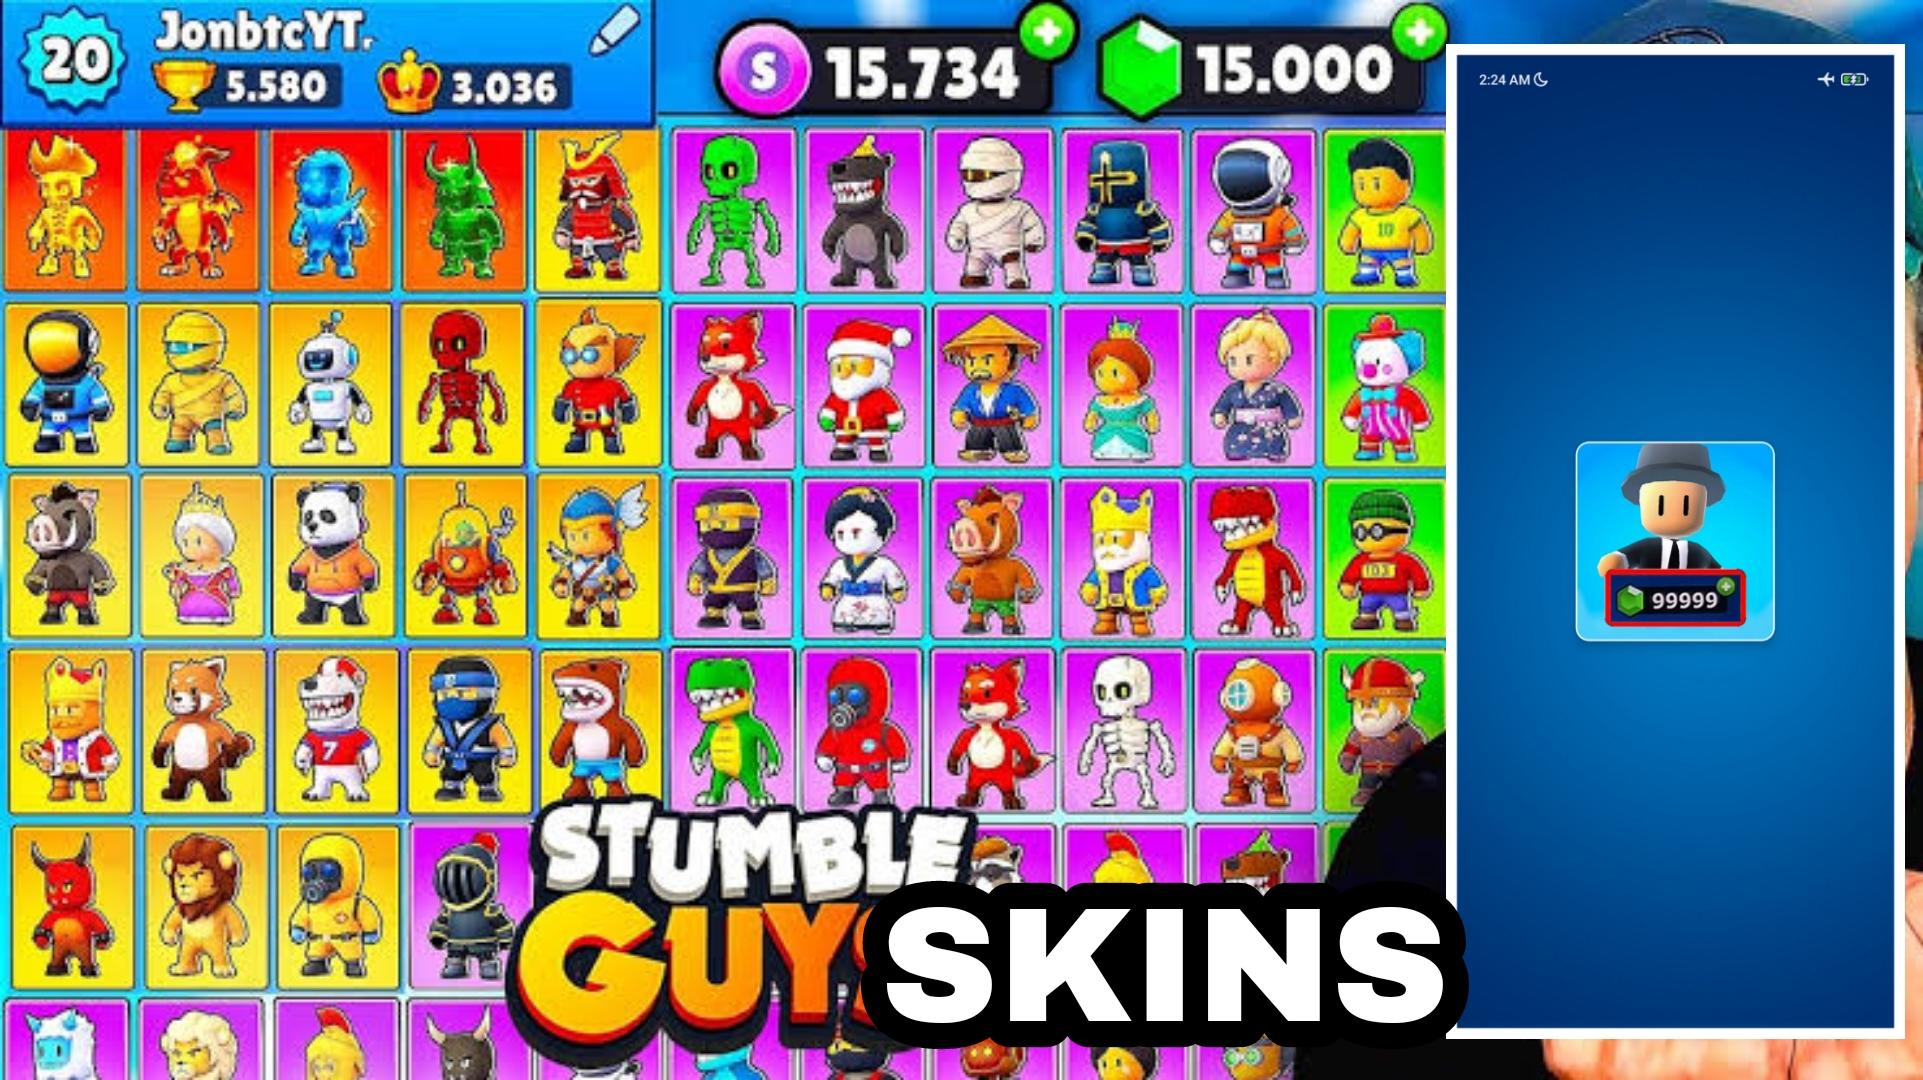 Stumble Guys (GameLoop) for Windows - Download it from Uptodown for free